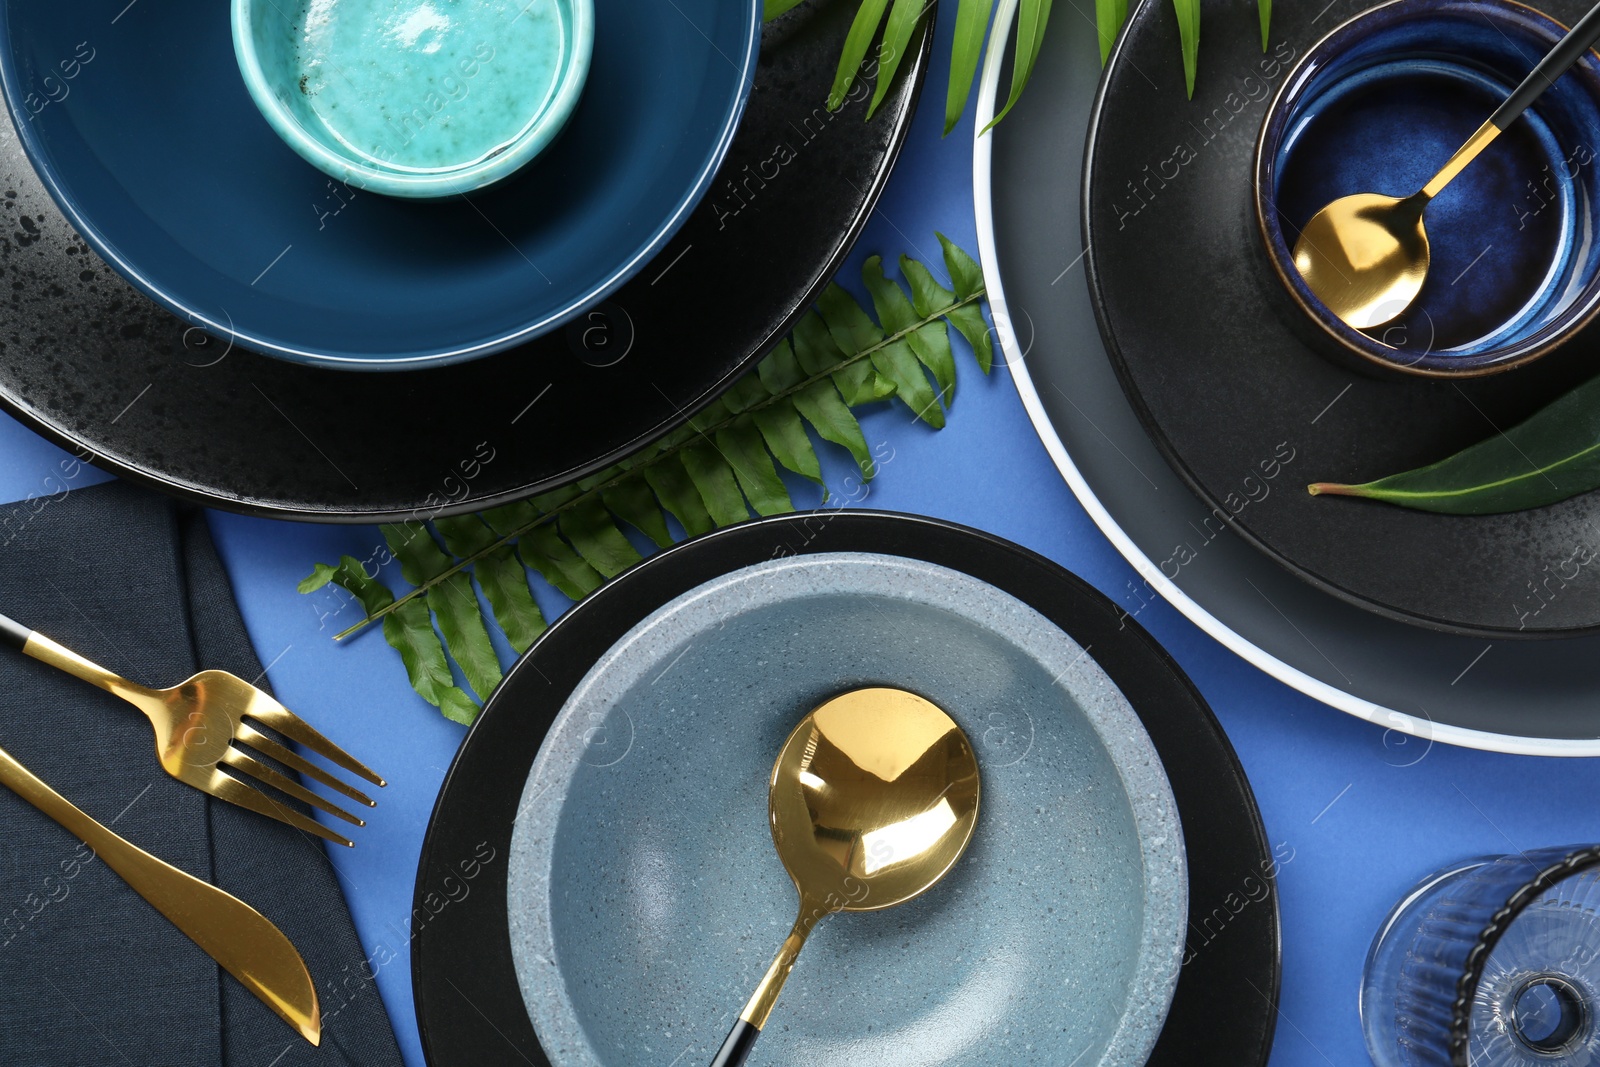 Photo of Flat lay composition with stylish ceramic plates and floral decor on blue background